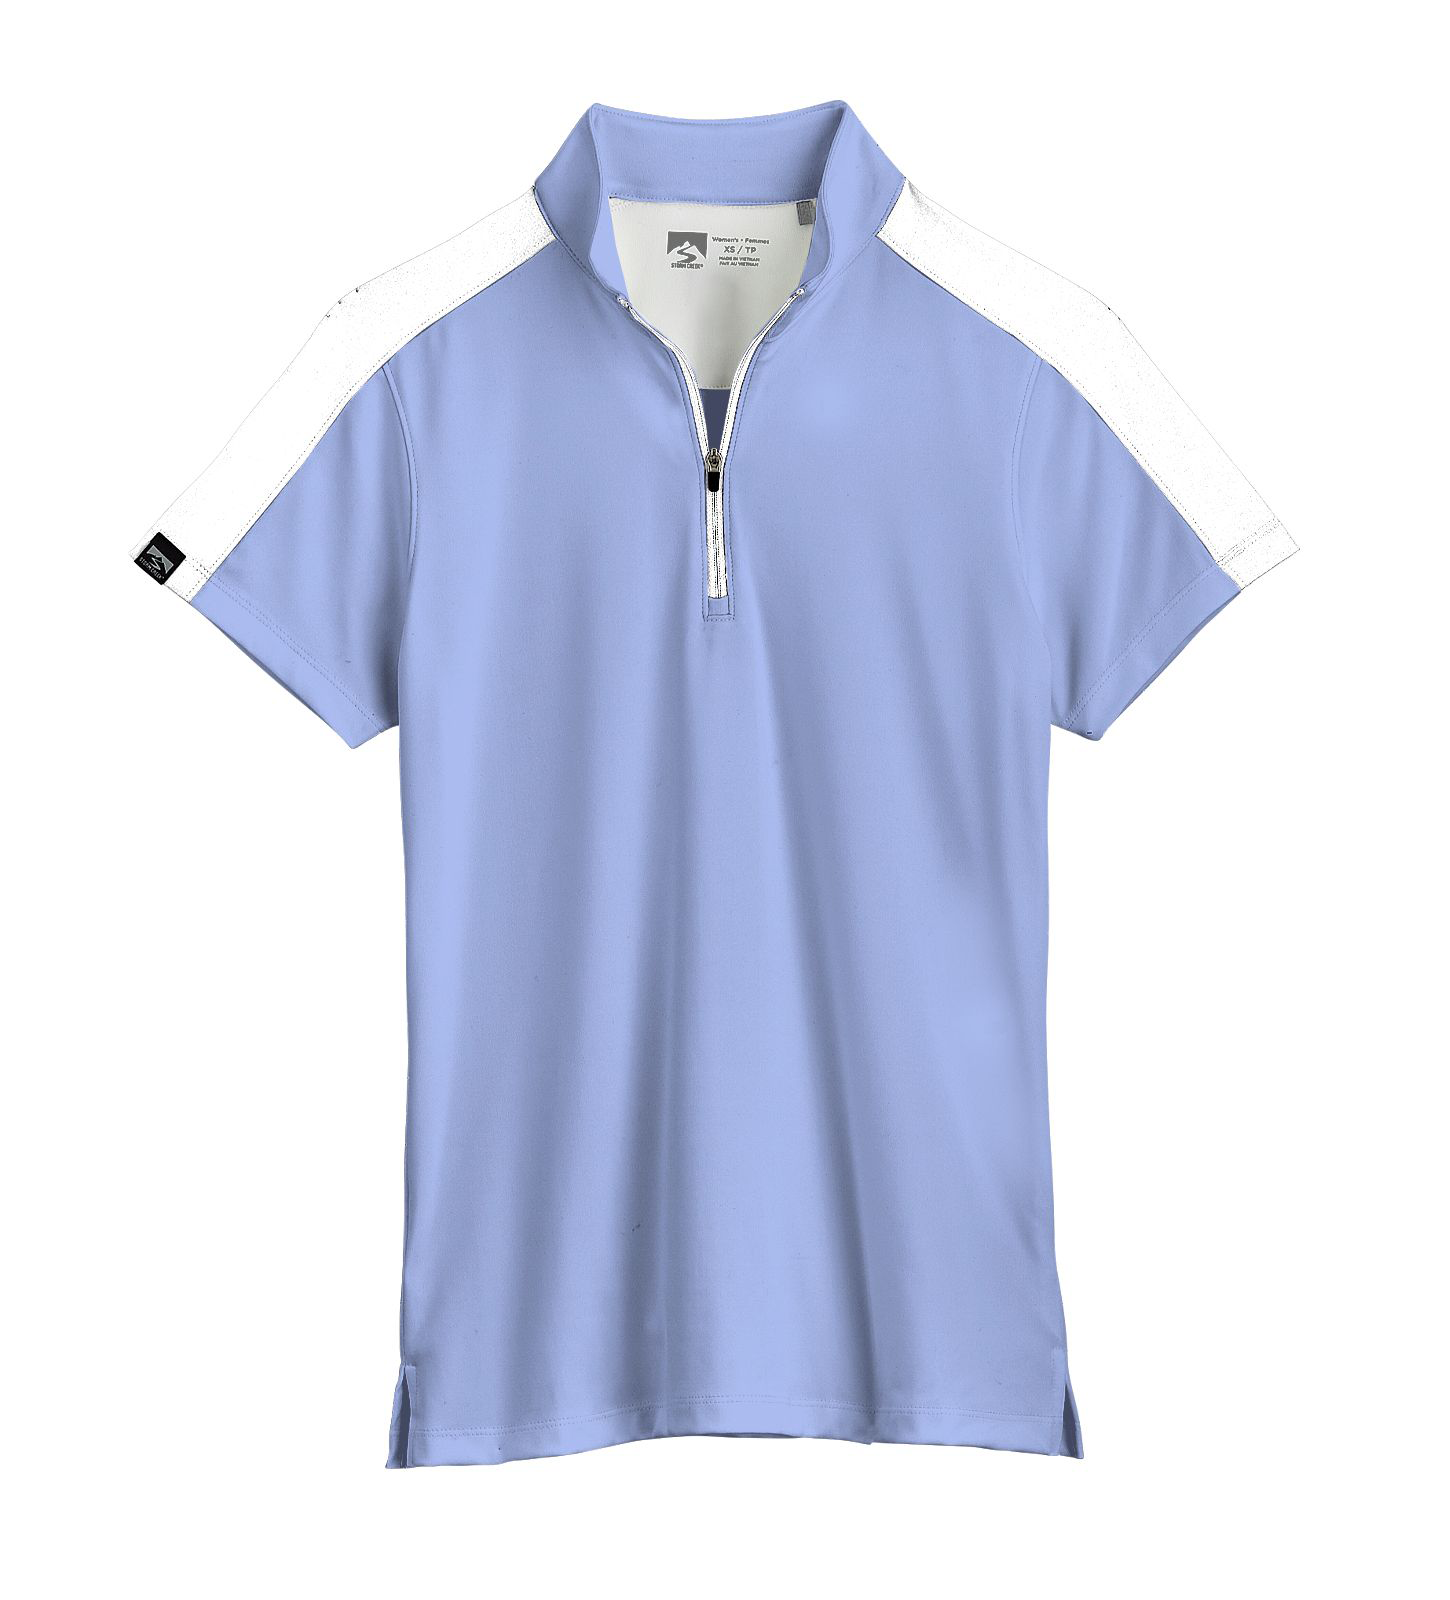 Storm Creek Activator Short-Sleeve Polo Shirt for Ladies - Peri Blue/White - S